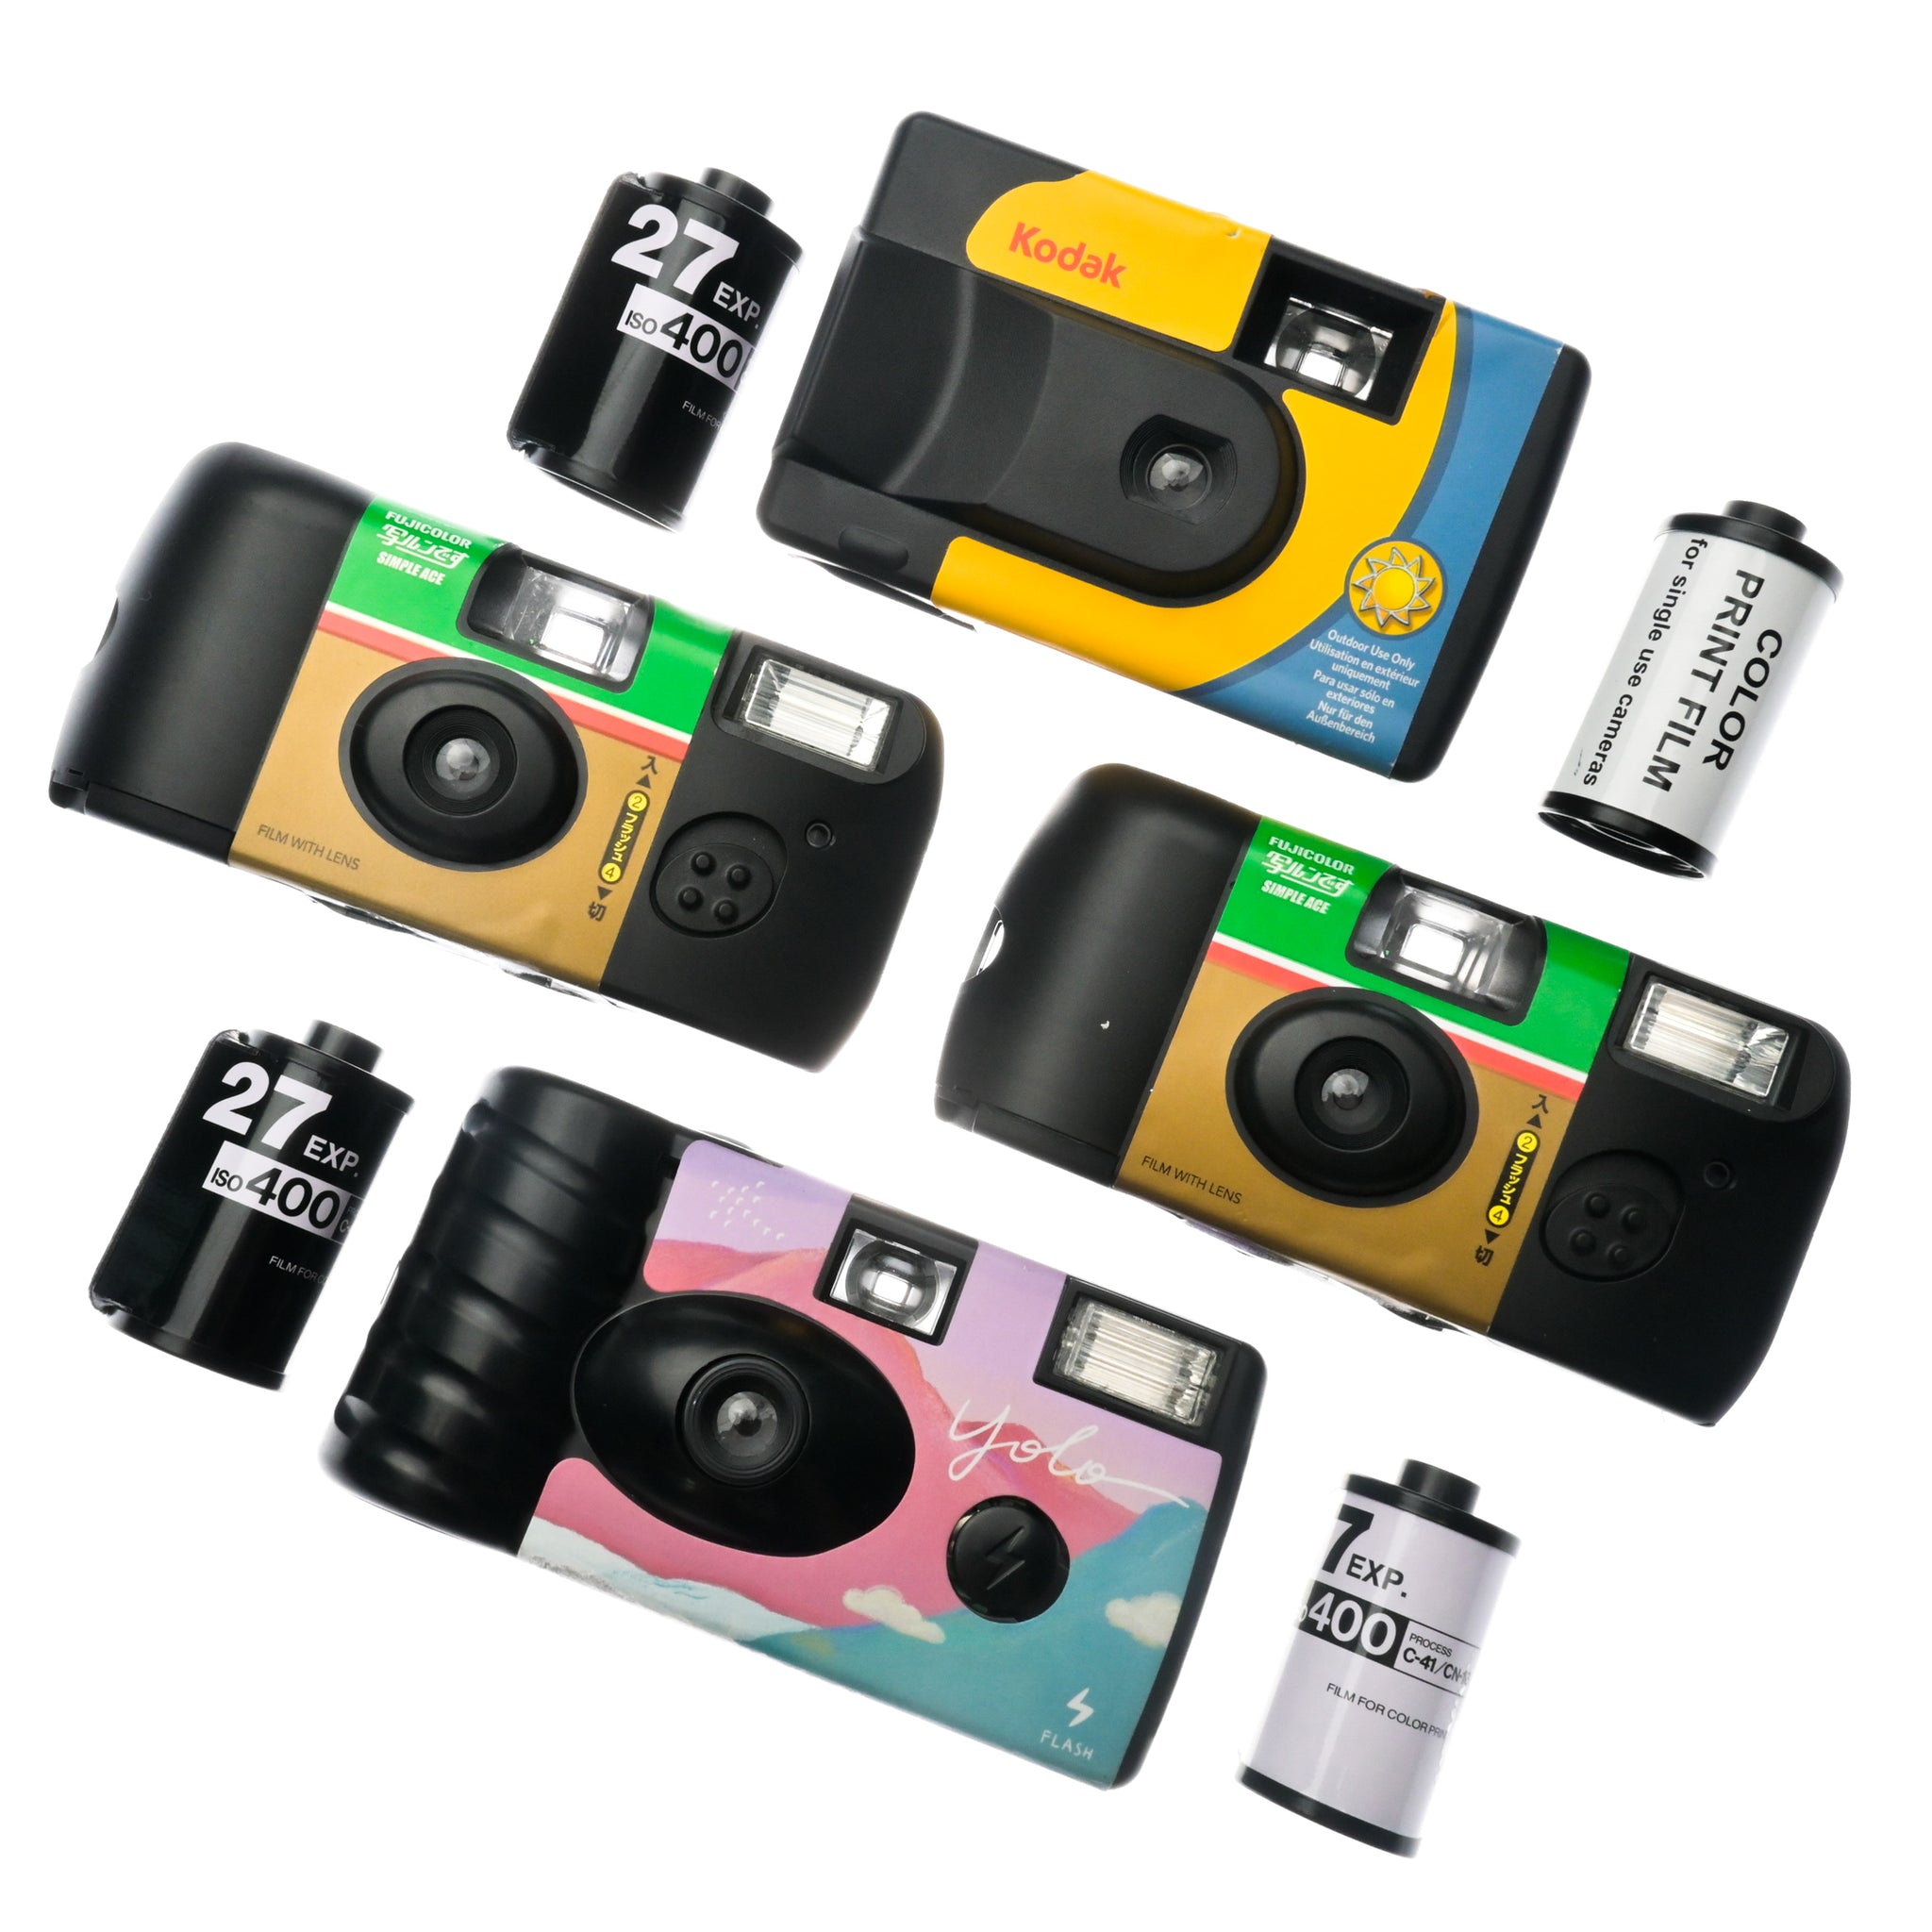 How Much Does it Cost to Develop a Disposable Camera? - Later Cam